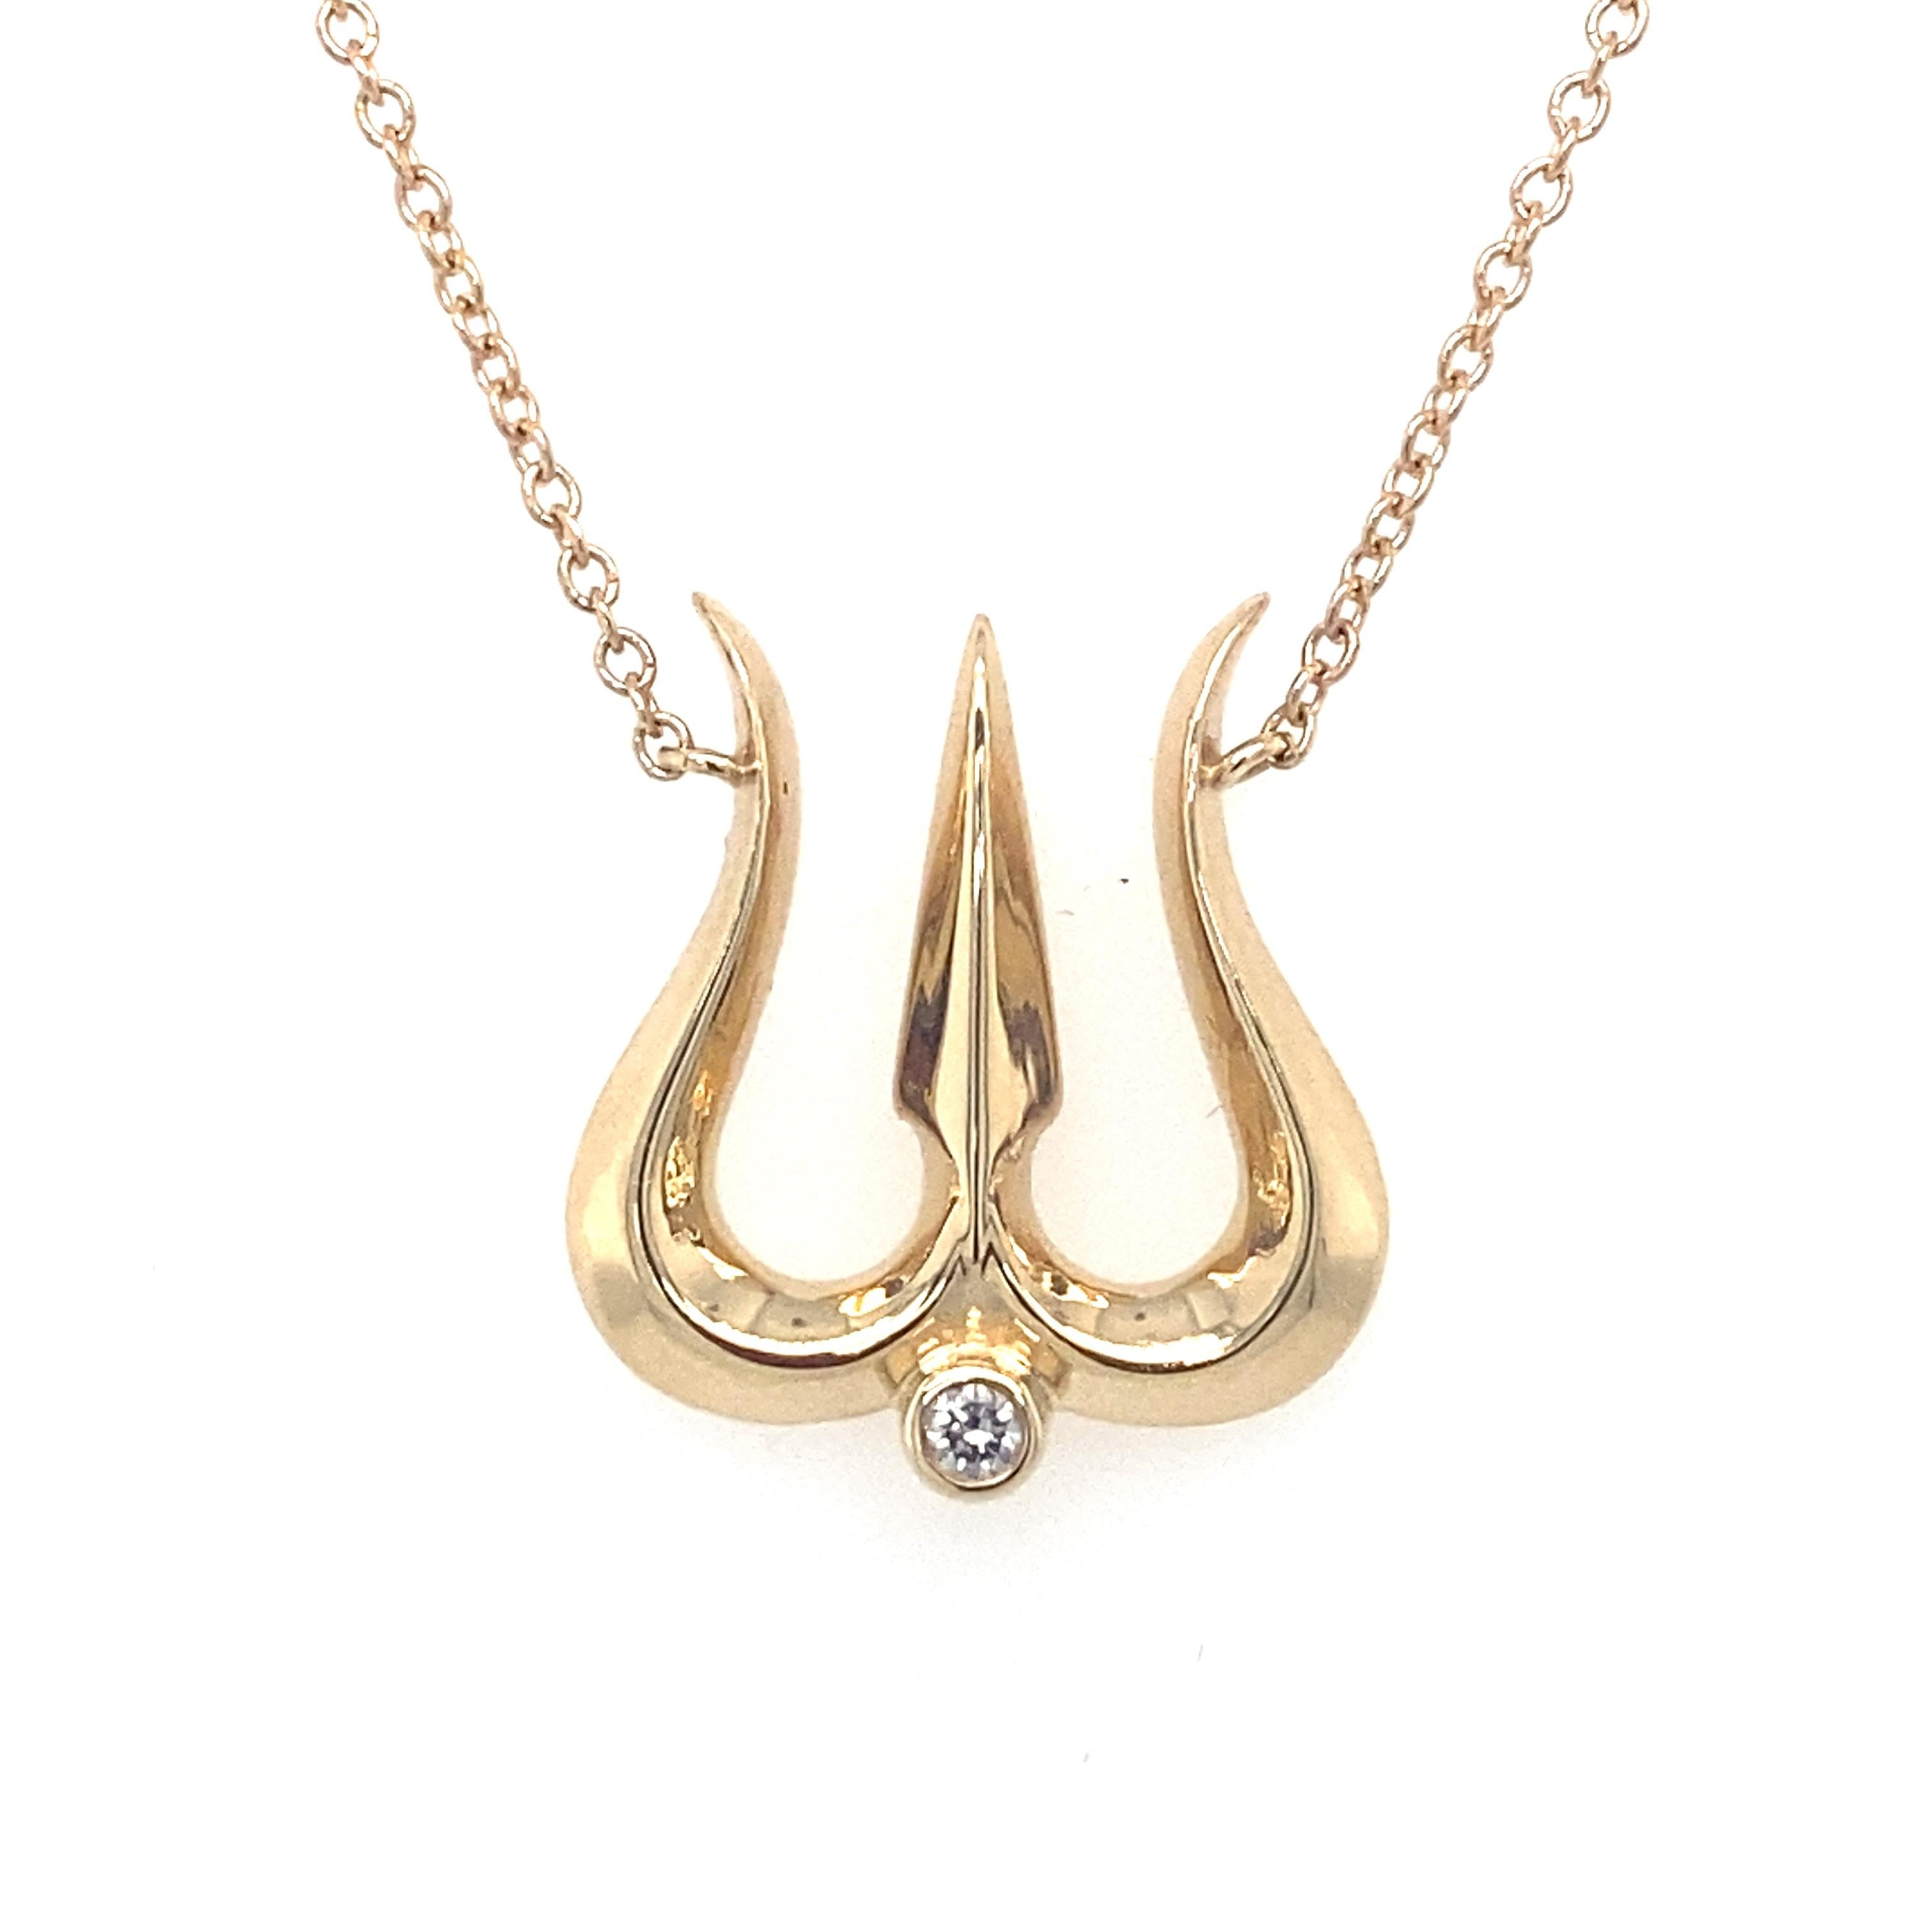 Item Details: This pendant features a Hindu trishula weapon symbol with one accent diamond.

Circa: 2000s
Metal Type: 14k yellow gold
Weight: 3.3g
Size: 18in L

Diamond Details:

Carat: 0.05 carats
Shape: Round
Color: G
Clarity: VS